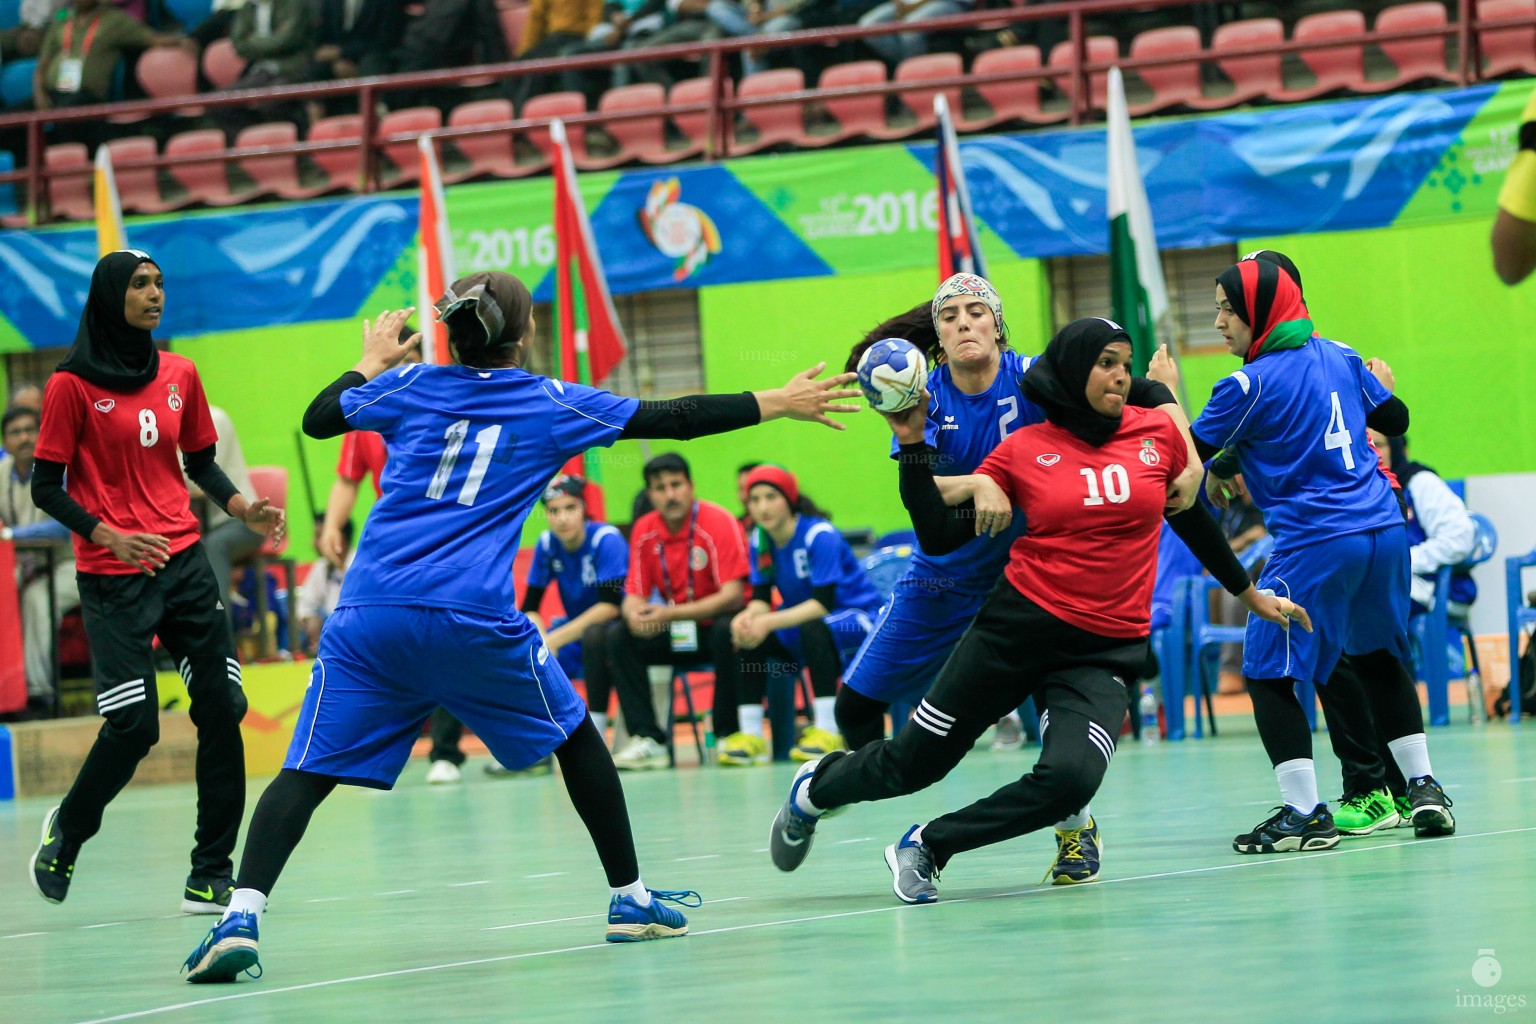 Maldives handball team played against Afghanistan in the group stage matches in the South Asian Games in Guwahati, India, Friday, February. 12, 2016. (Images.mv Photo/ Hussain Sinan).